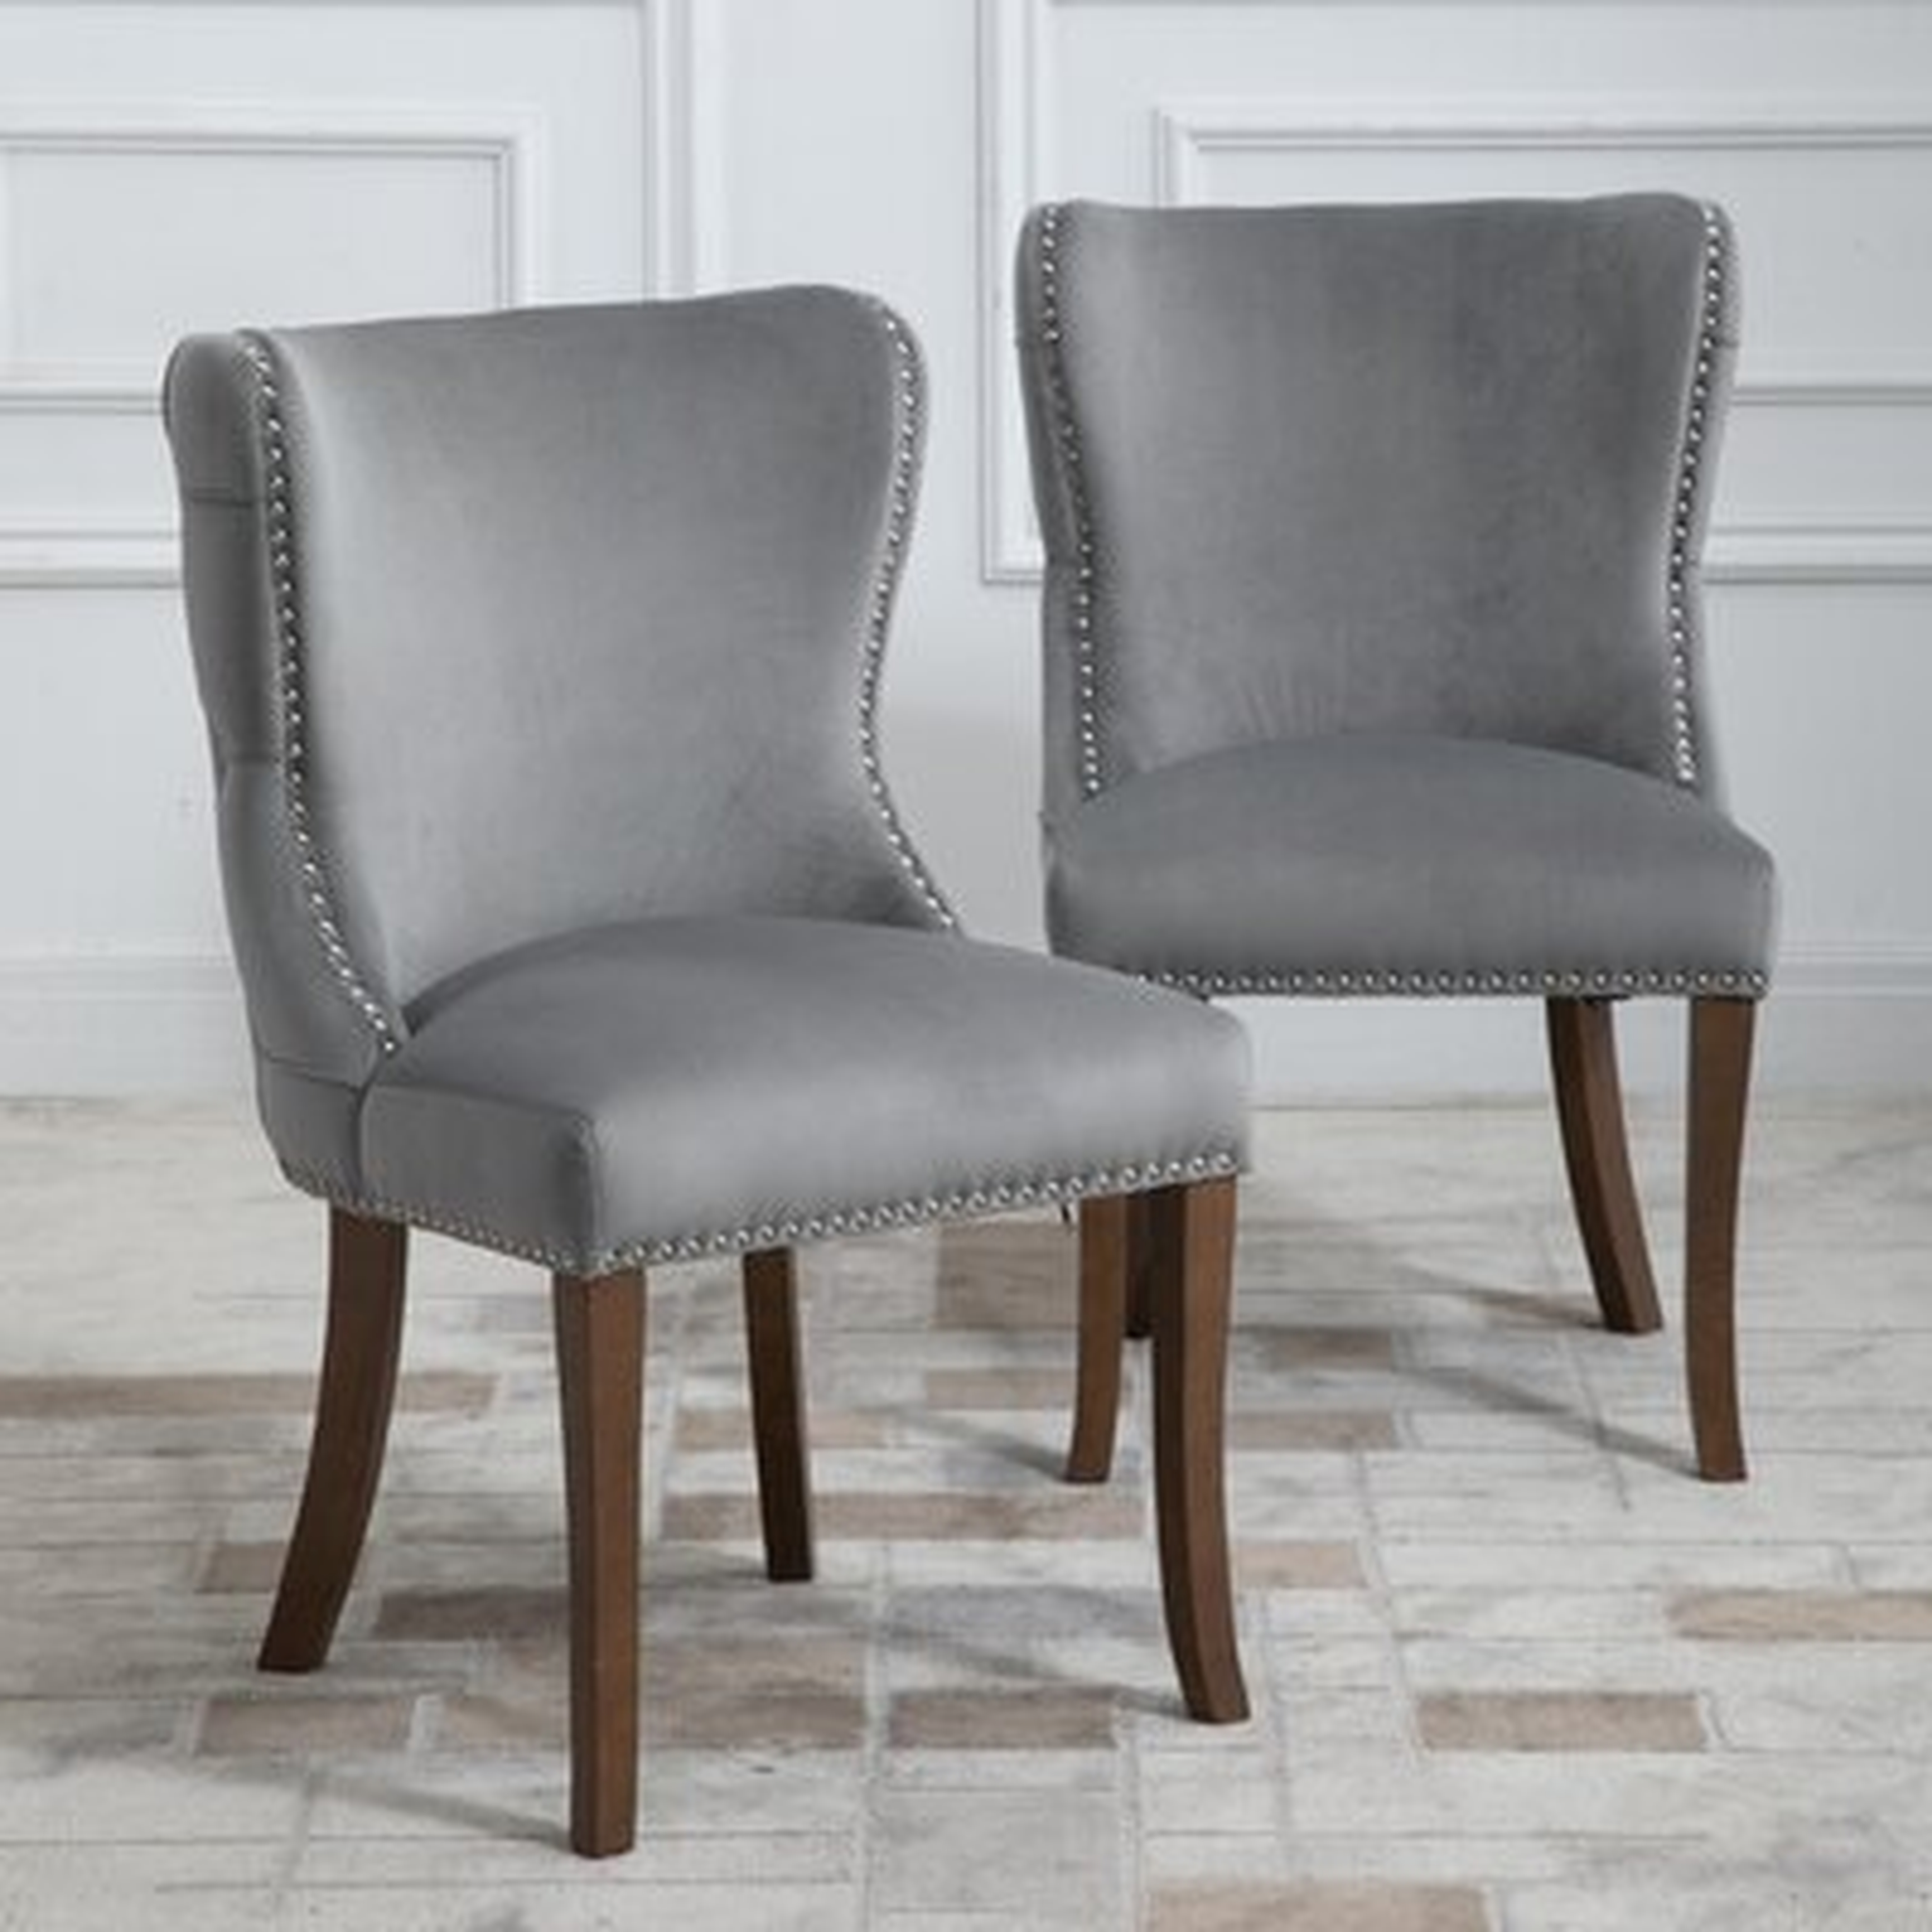 Upholstered Wing-Back Dining Chair Parsons Chair Set Of 2 - Wayfair